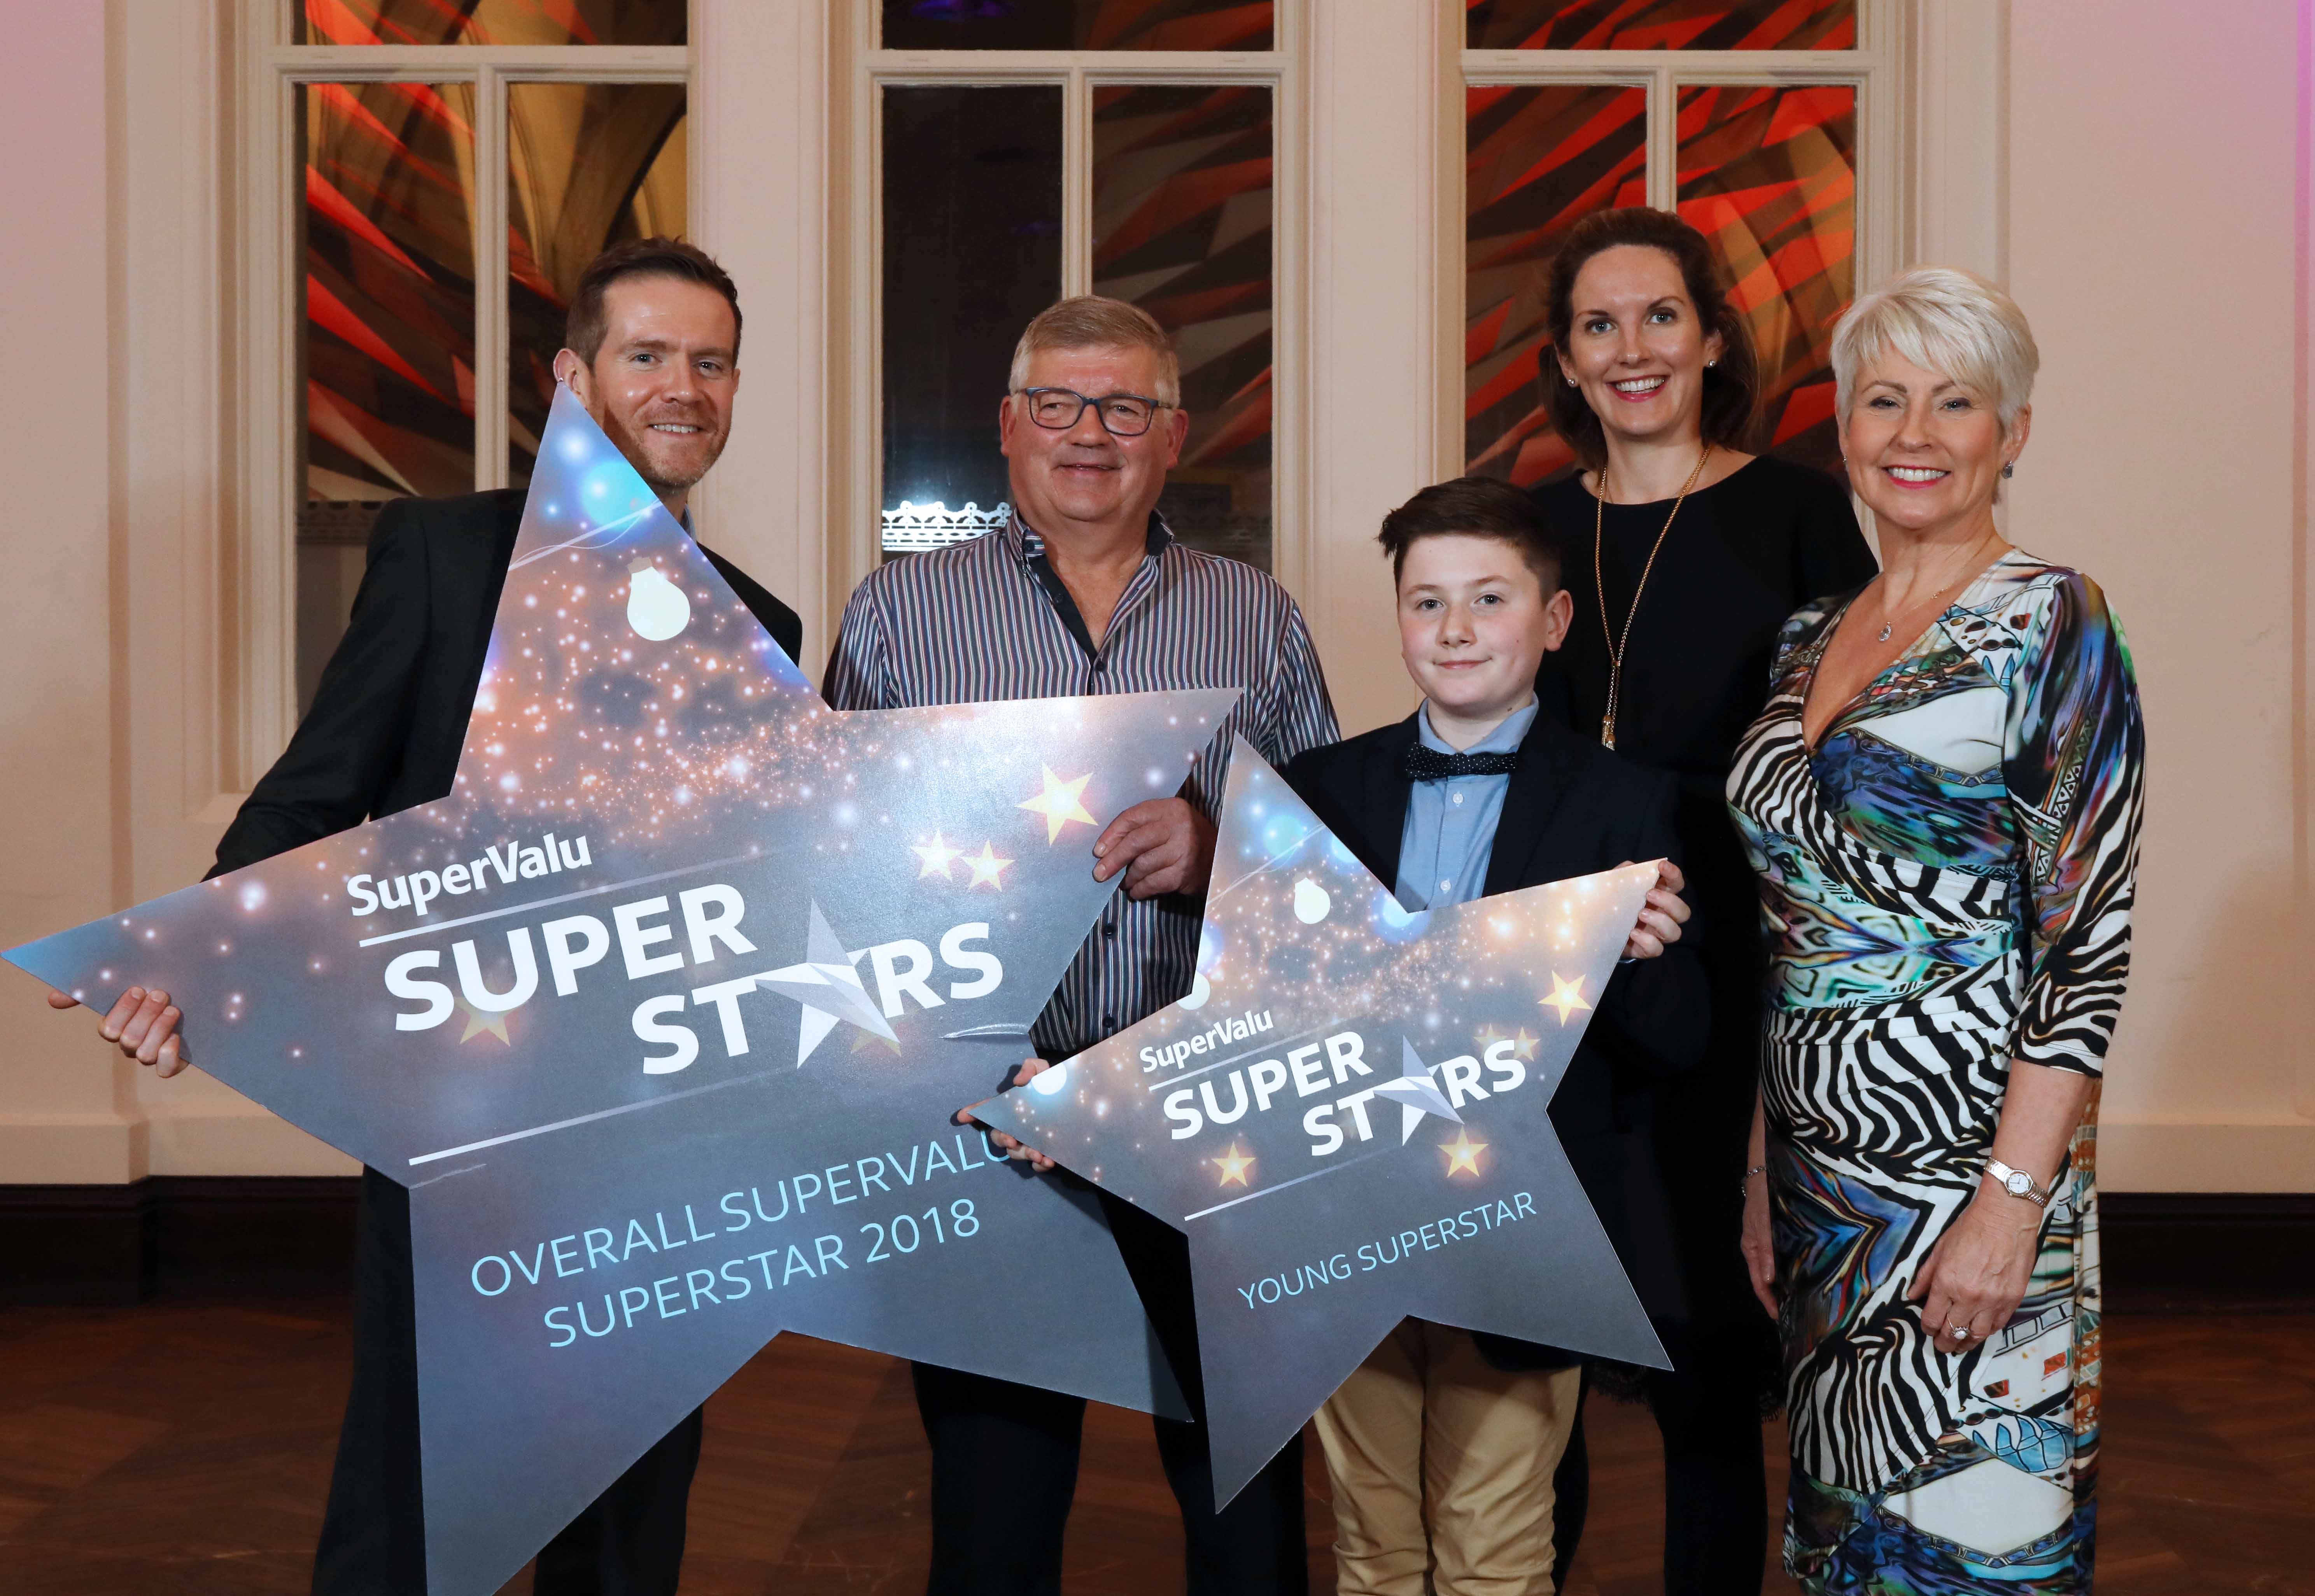 Supervalu launches search to find local community superstars